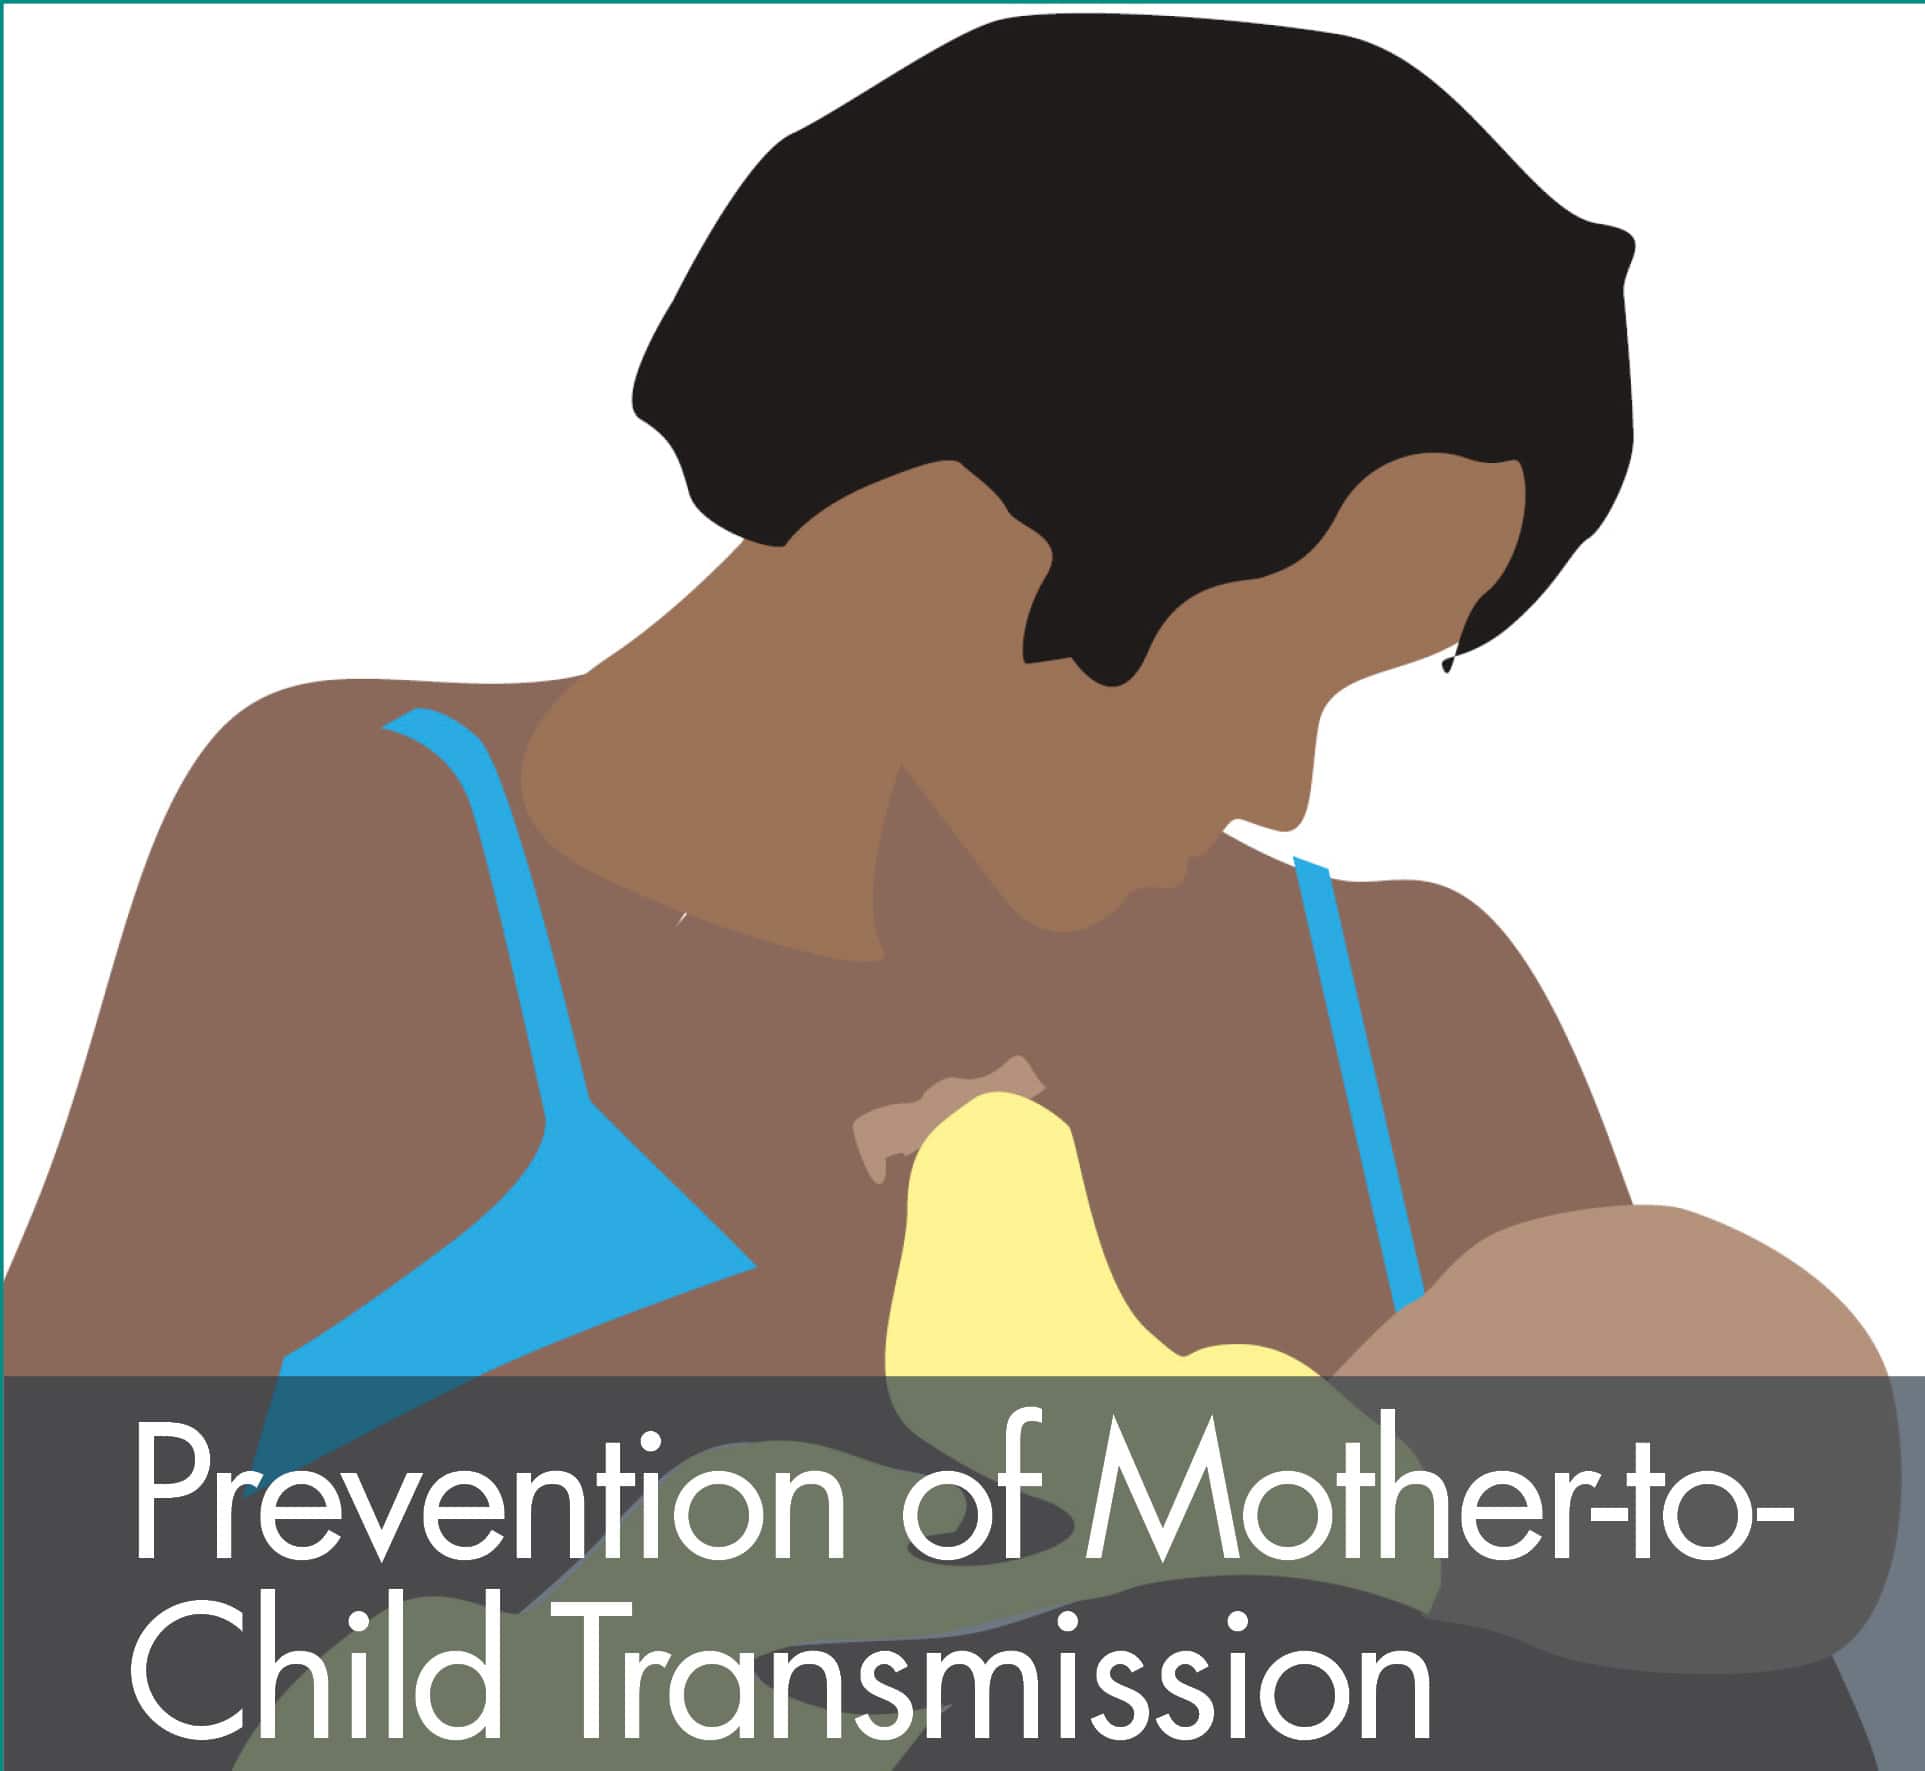 Prevention of Mother-to-Child Transmission